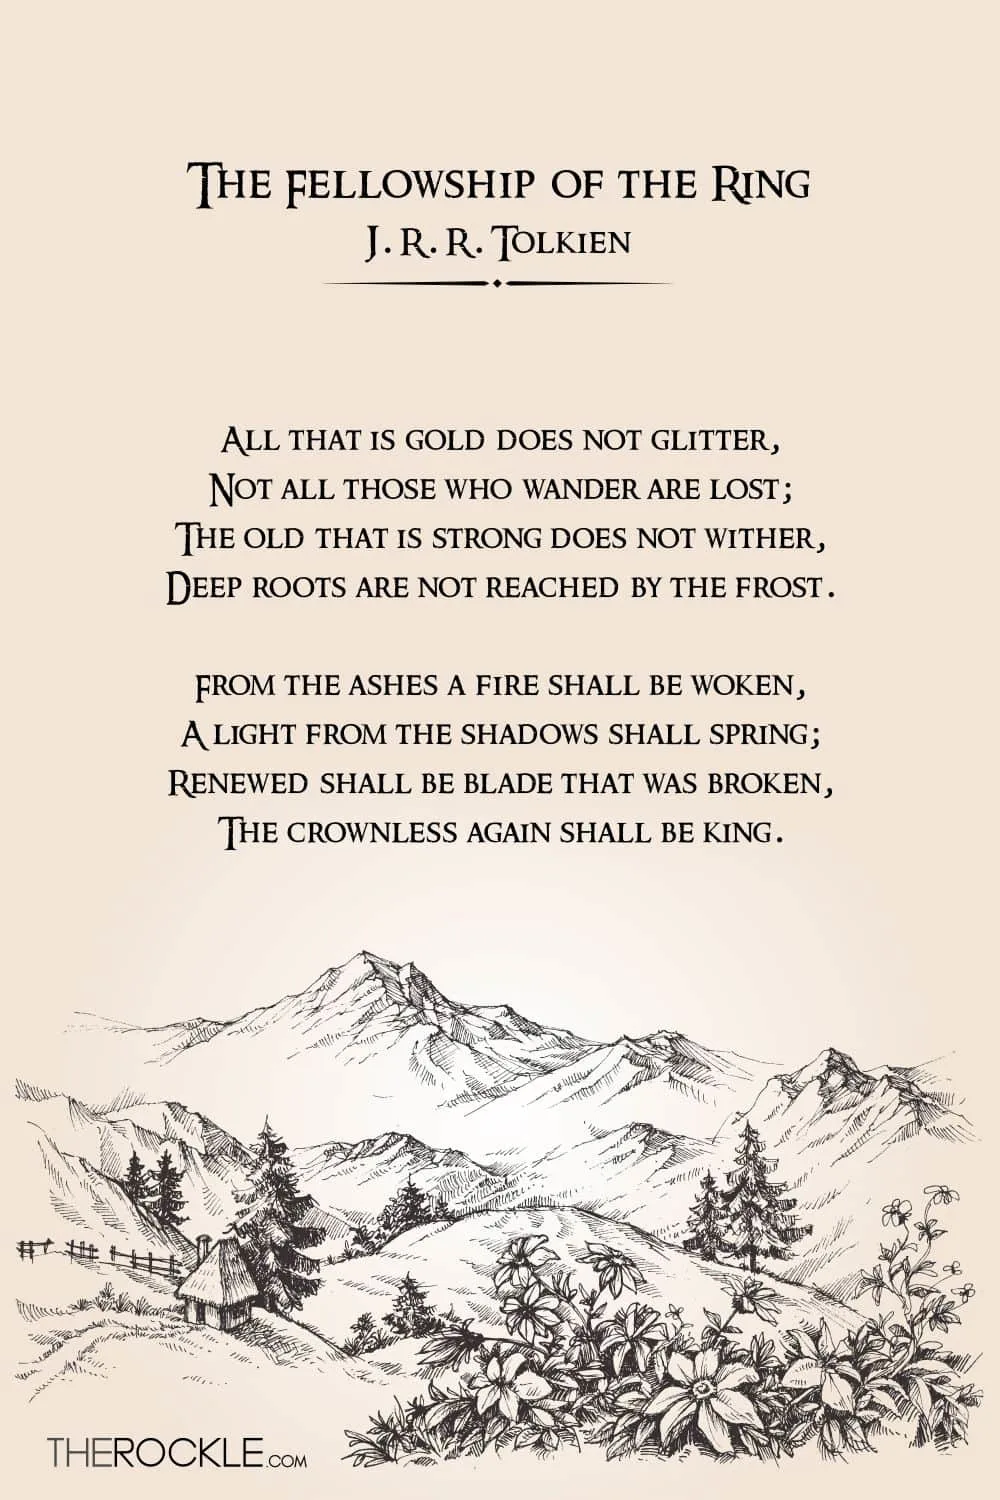 Tolkien poem All That is Gold Does Not Glitter